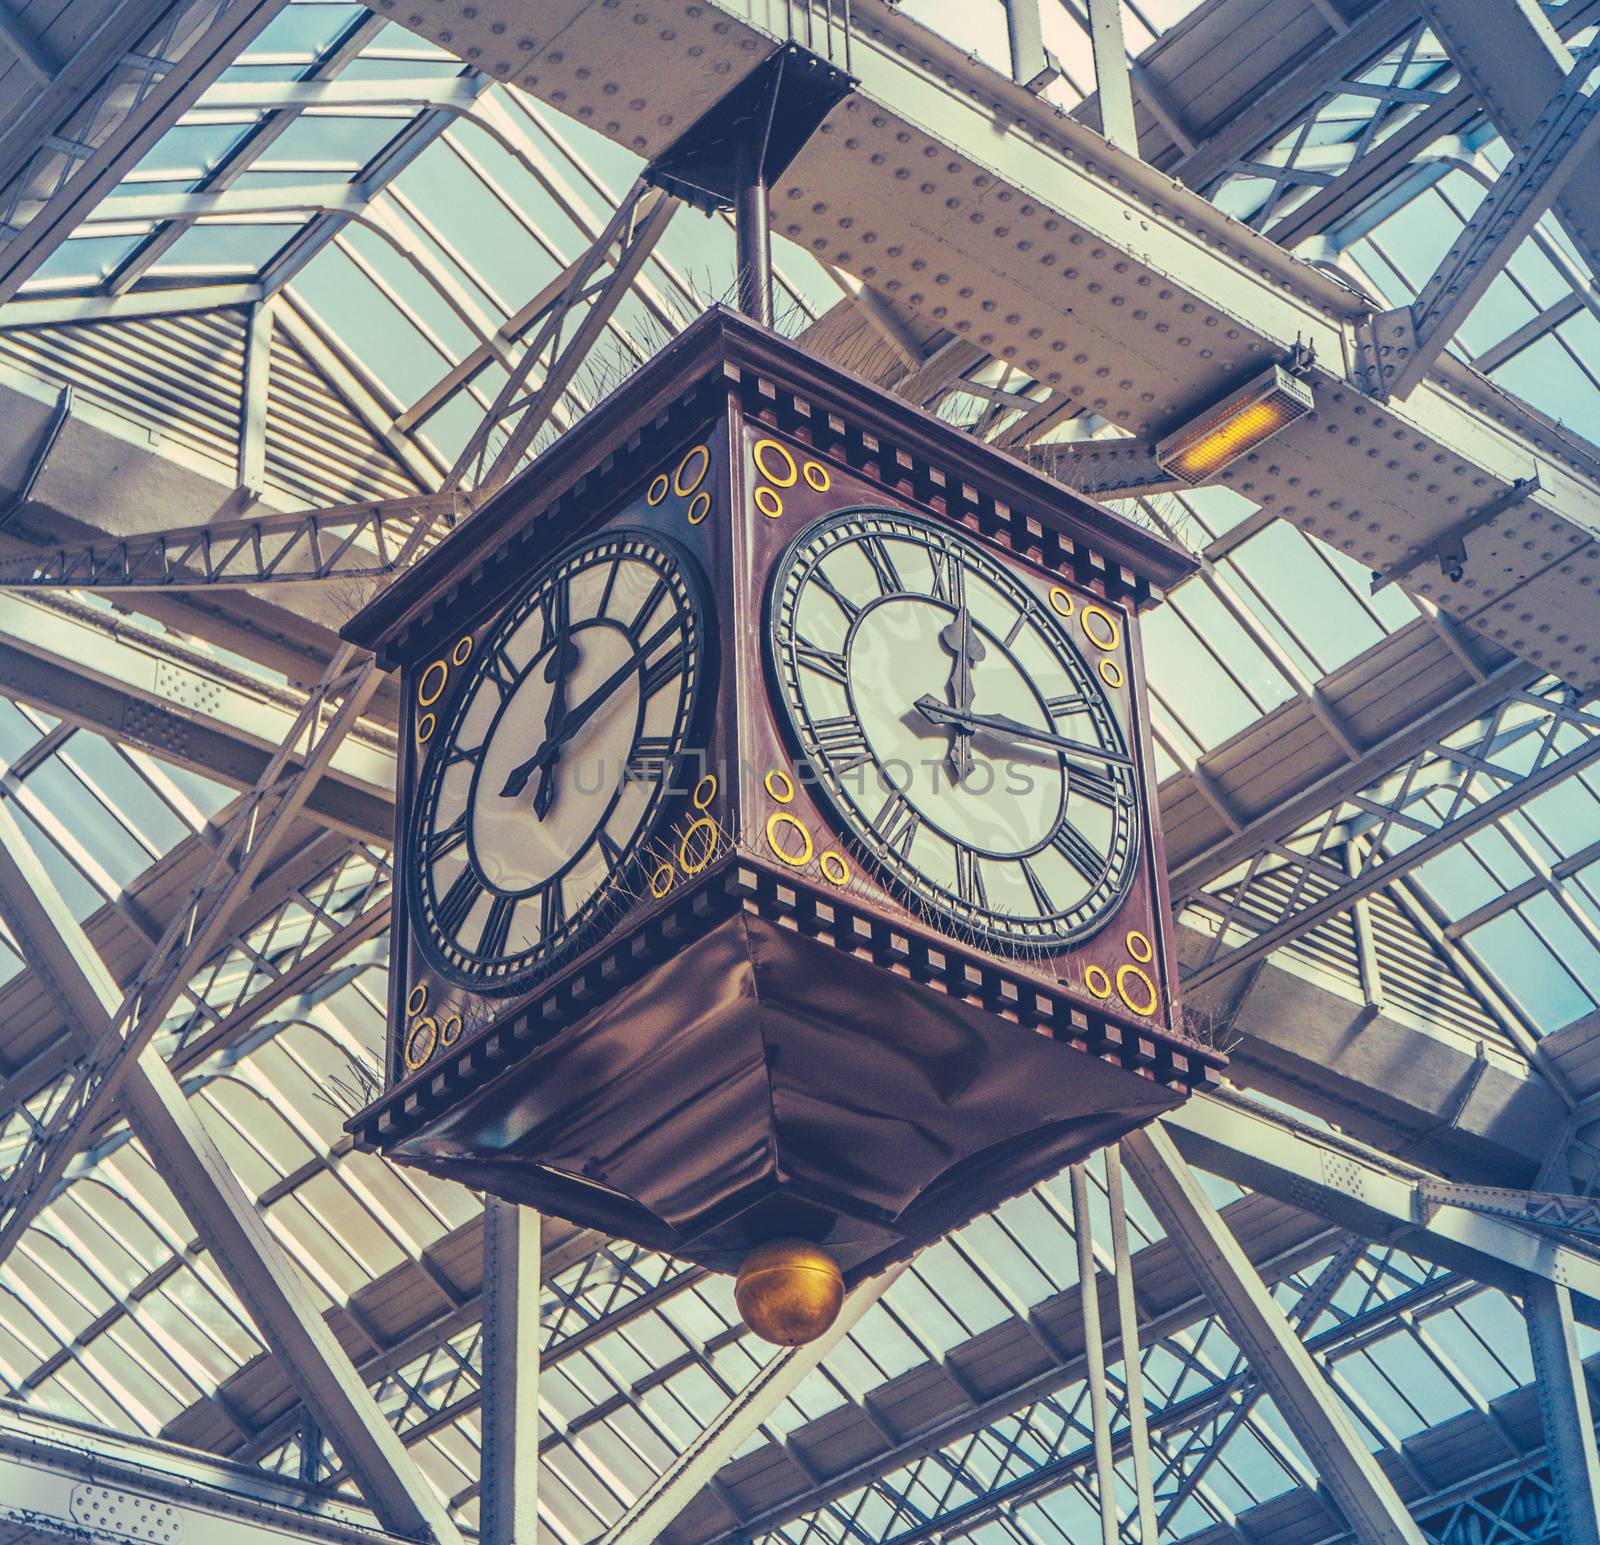 Retro Image Of The Vintage Clock And Meeting Point Under The Glass Roof Of Glasgow Central Station